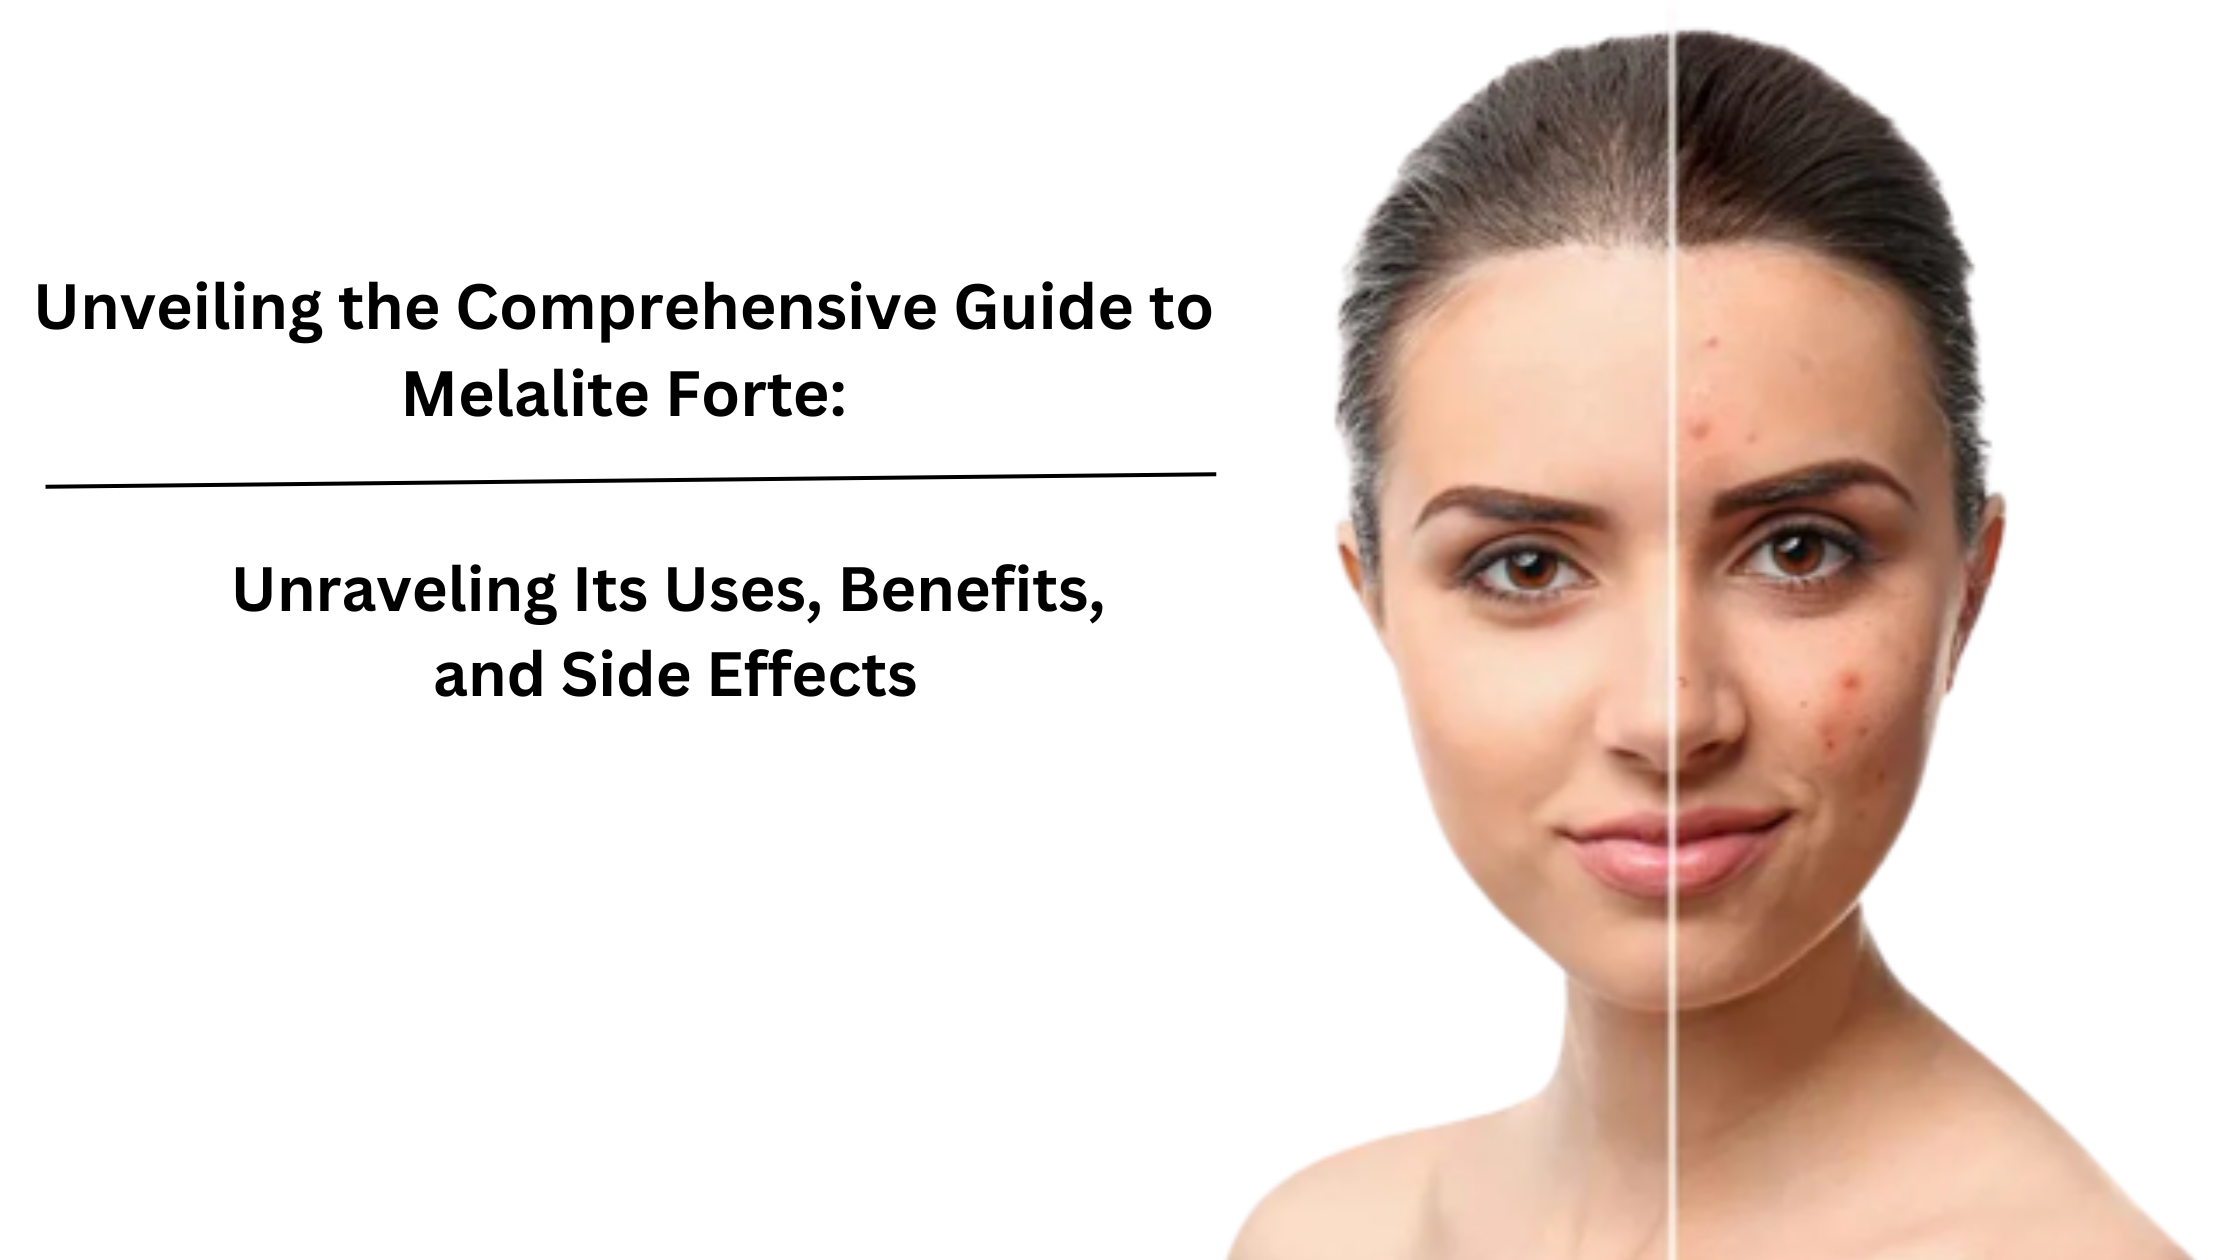 Unveiling the Comprehensive Guide to Melalite Forte: Unraveling Its Uses, Benefits, and Side Effects